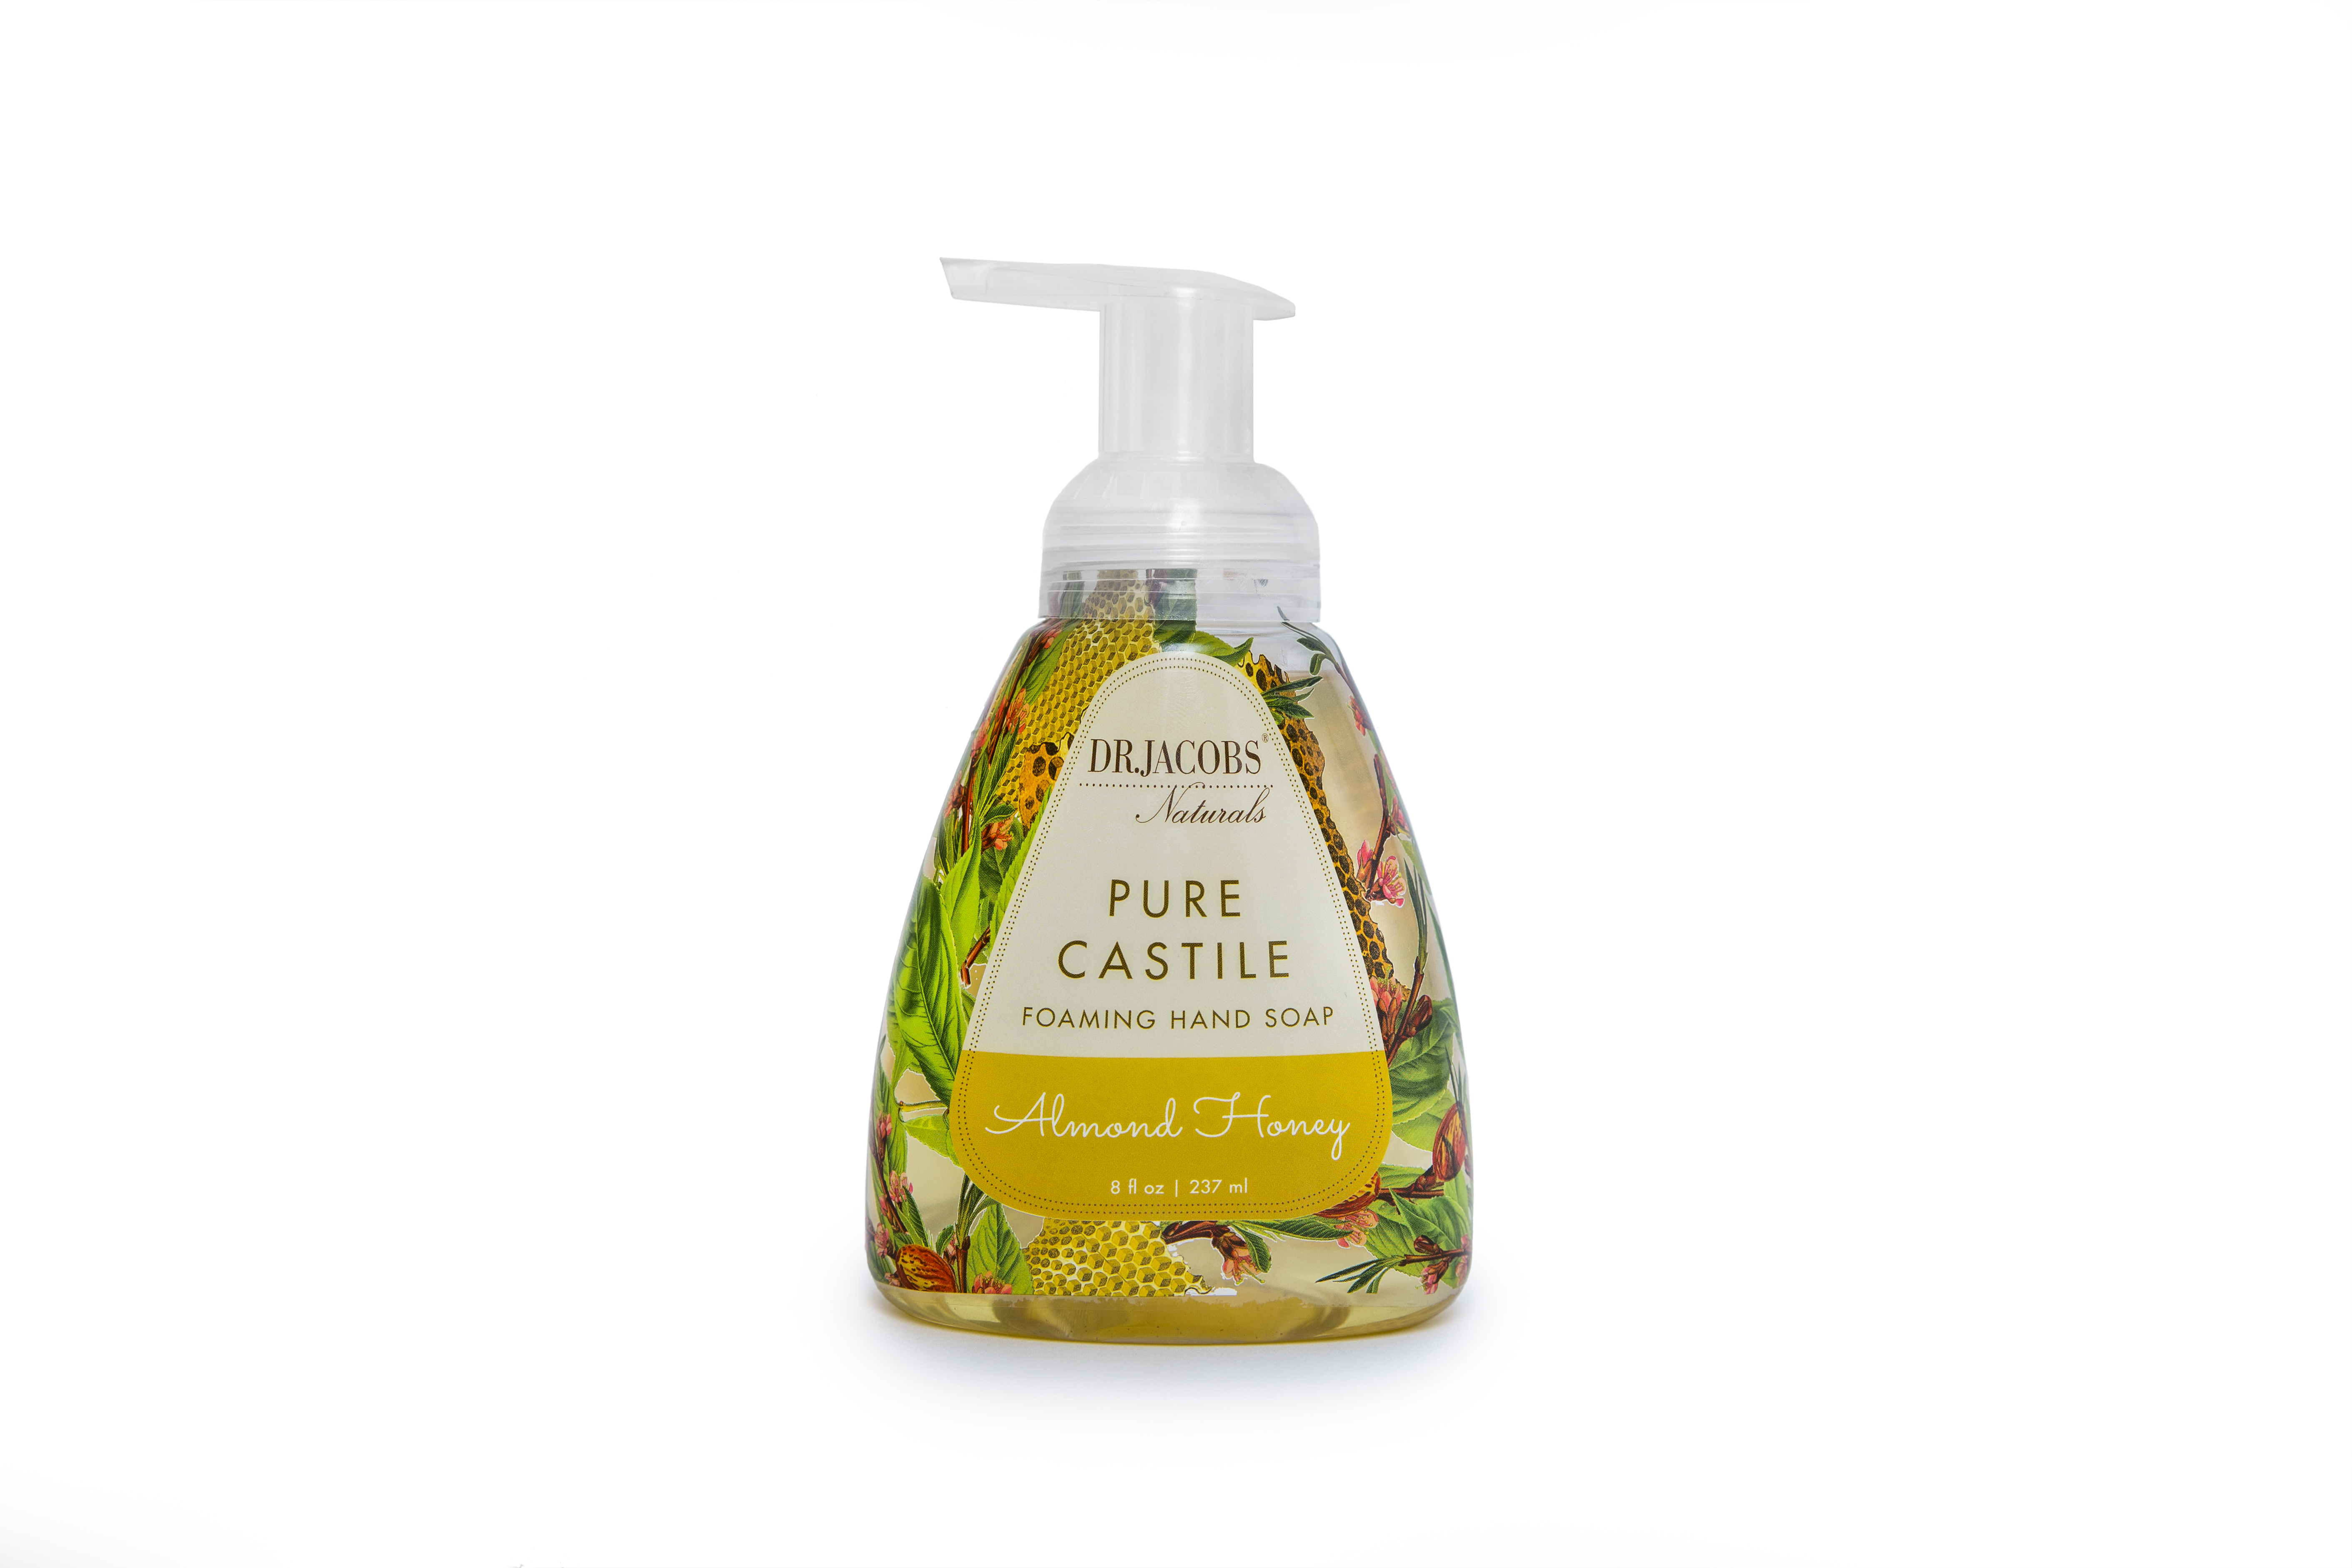 (Pack of 3) Dr. Jacobs Naturals Pure Castile Foaming Hand Soap, Almond Honey, 8 Oz - image 1 of 2